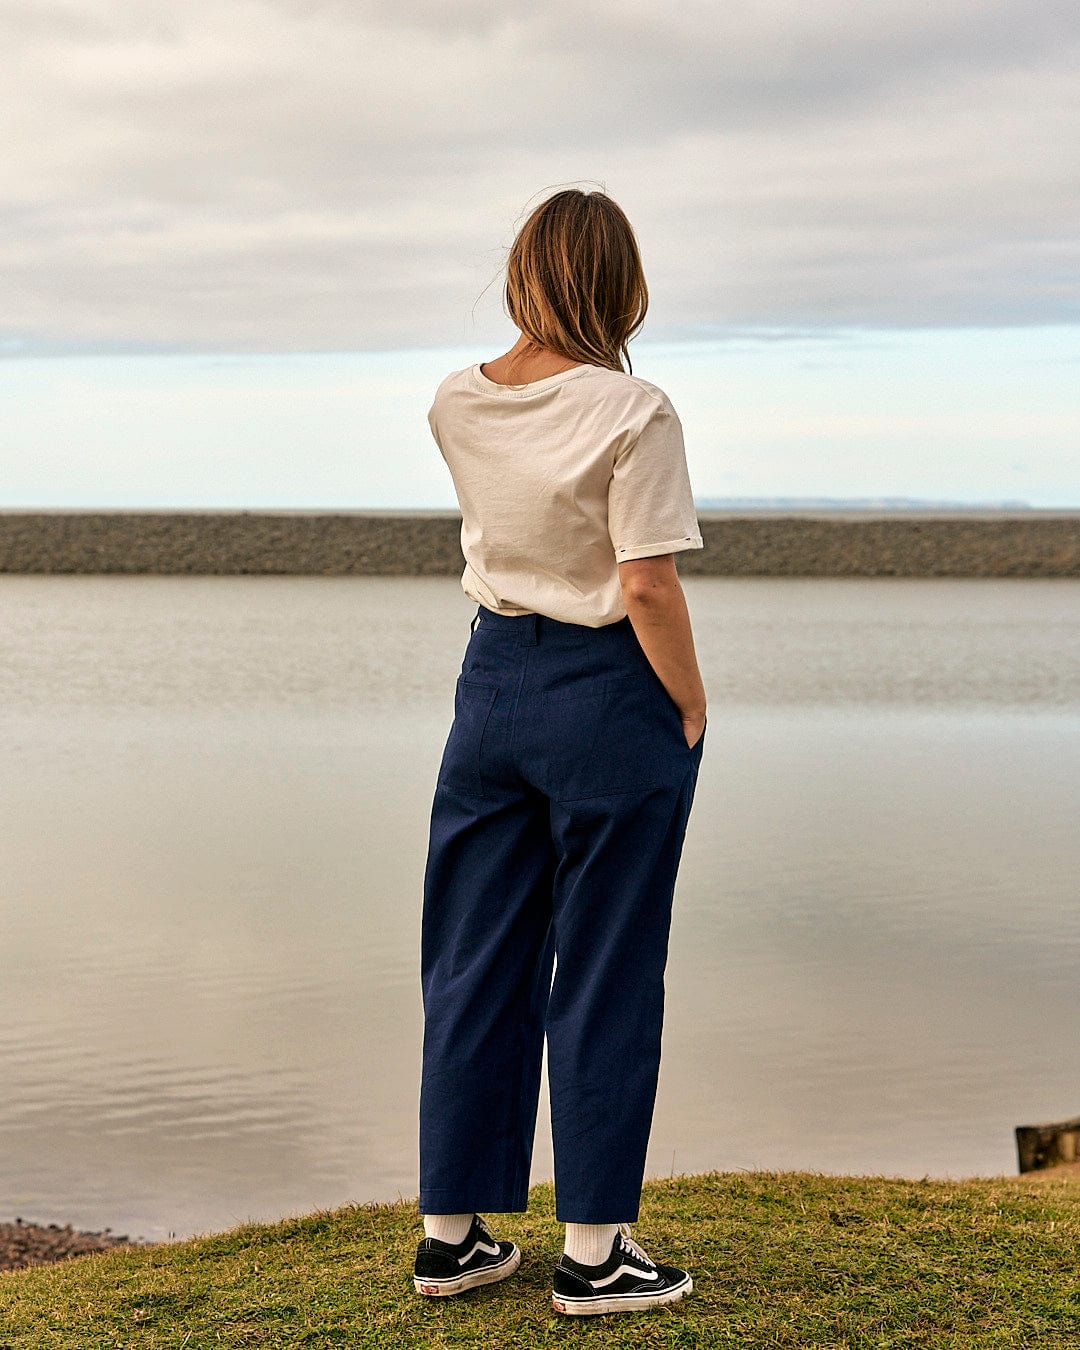 A woman standing by a body of water wearing a Saltrock Hilda - Womens Canvas Trouser - Dark Blue and t-shirt.